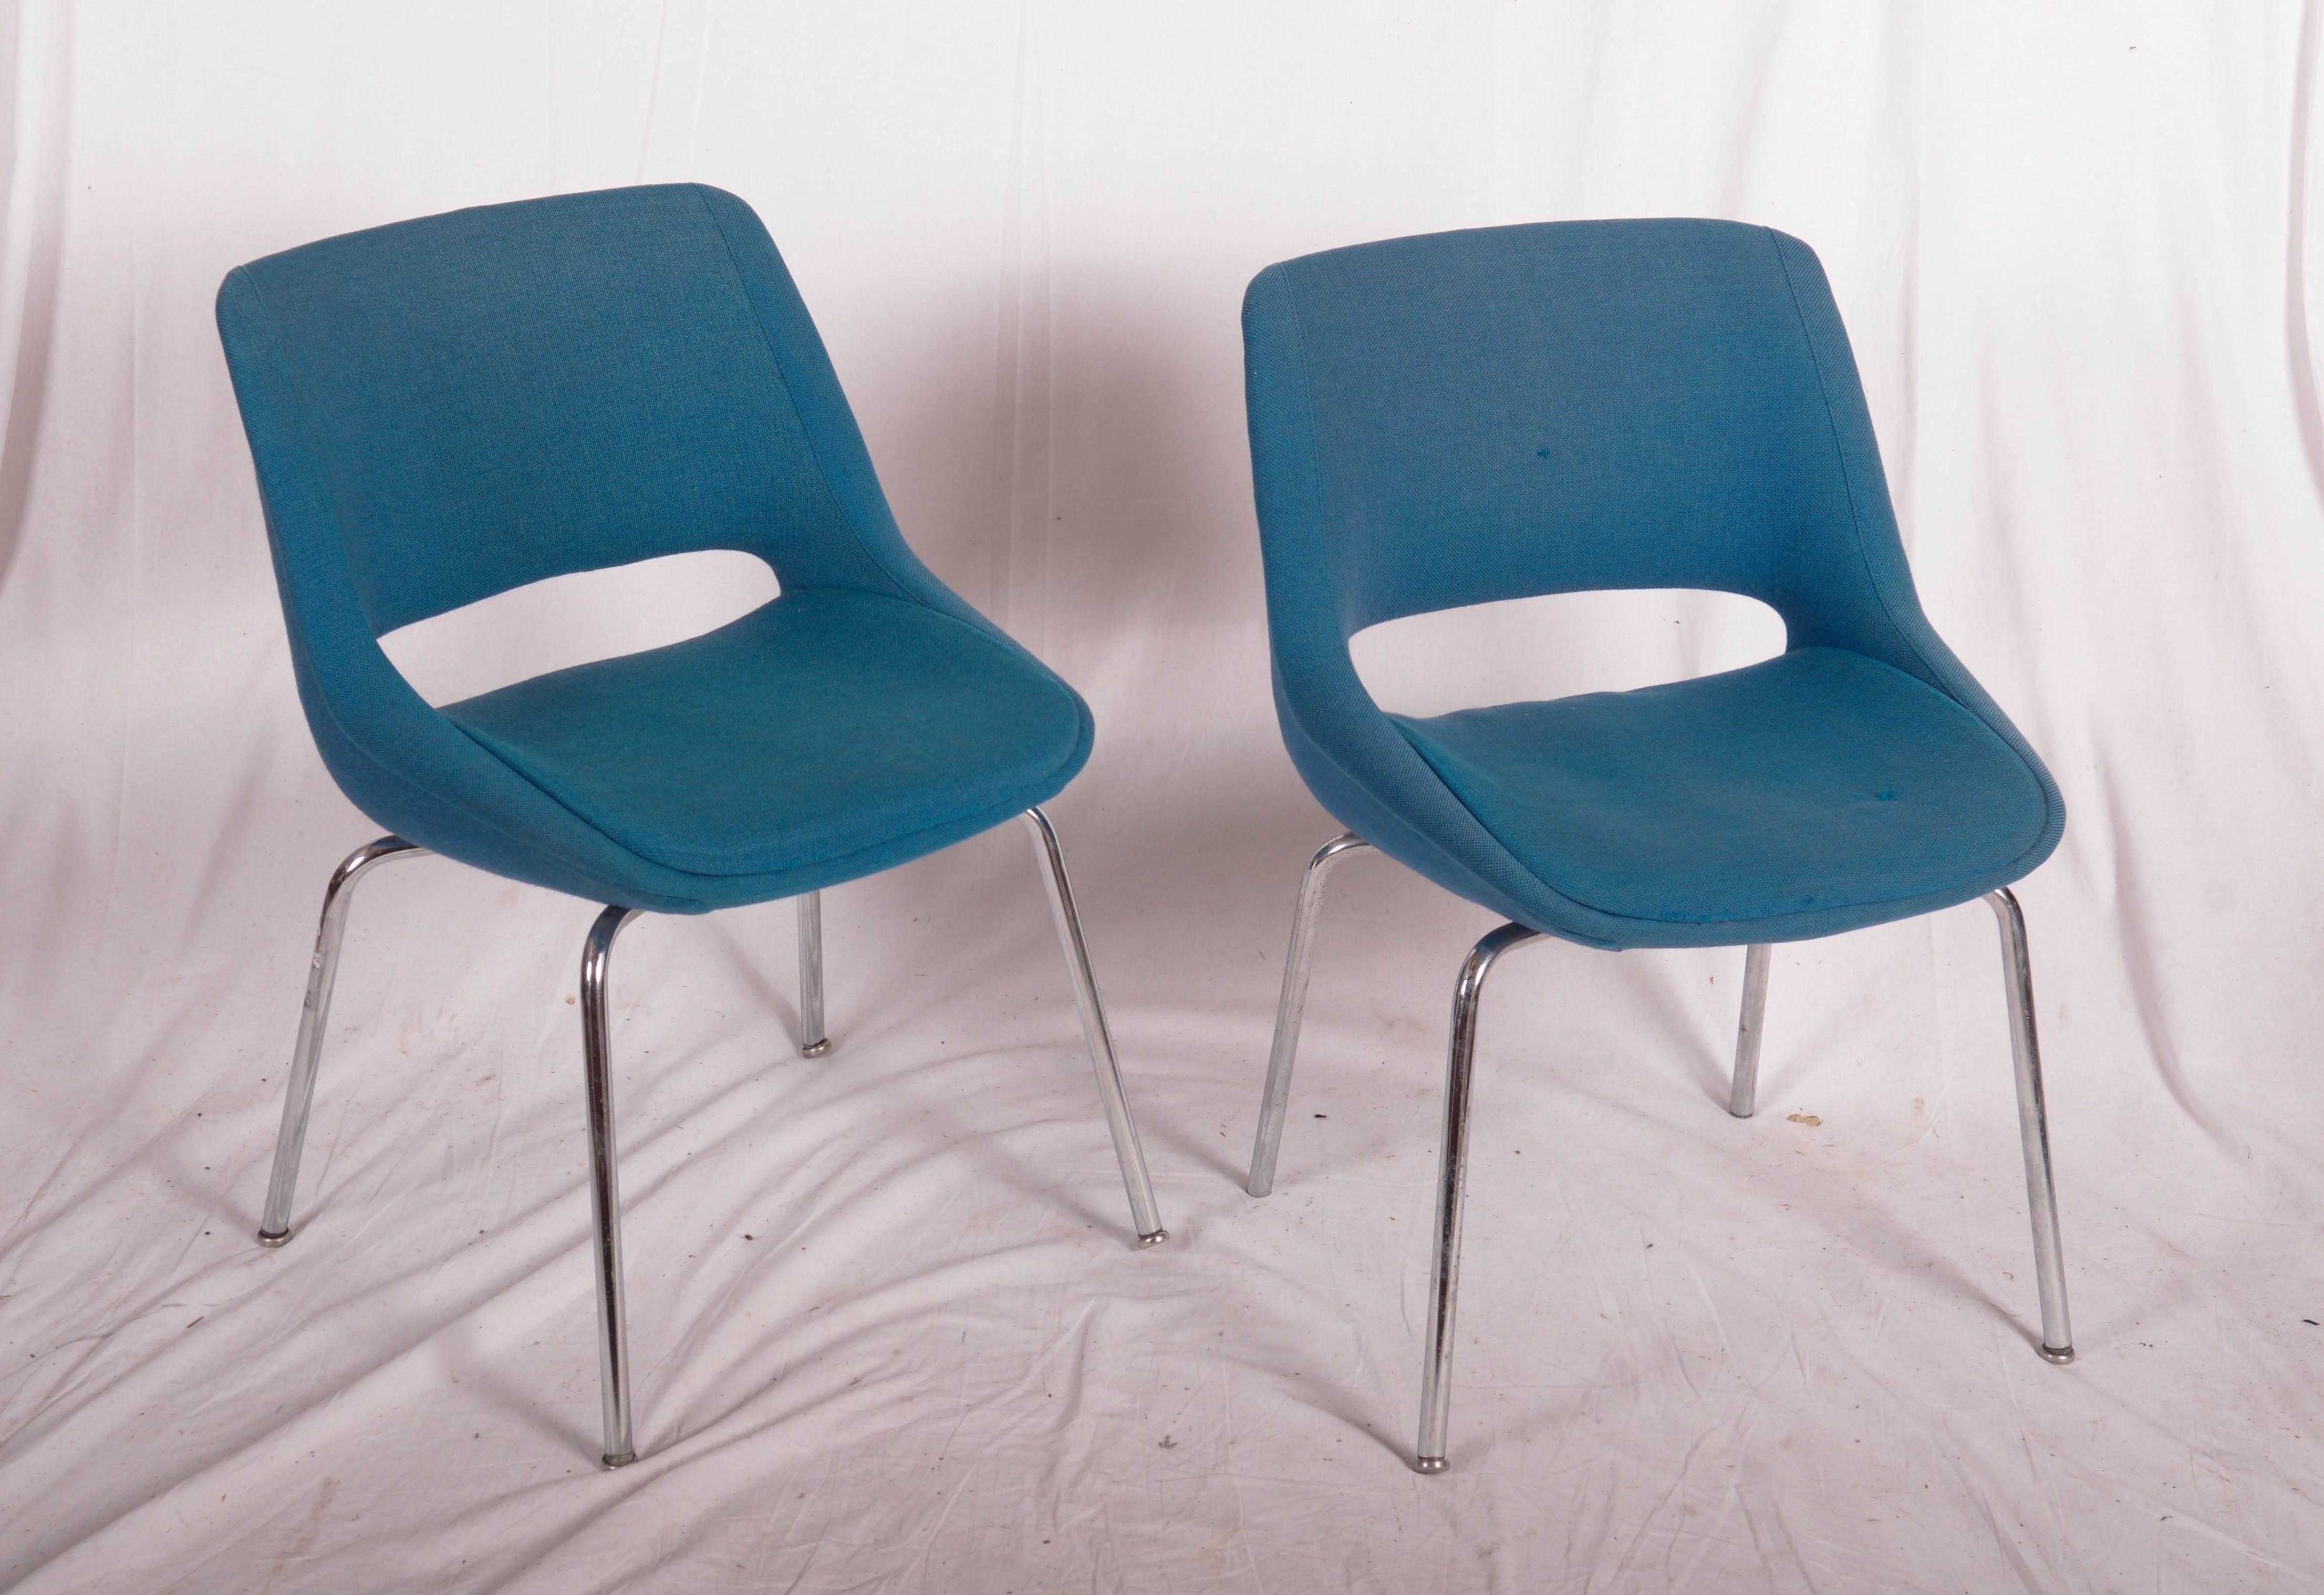 Upholstered with blue wool fabric on steel chromed legs, made by Olli Mannermaa in the 1960s for Martela Oy. 
Upholstery with hole on seat and back rest on one chair.
New upholstery or request available.